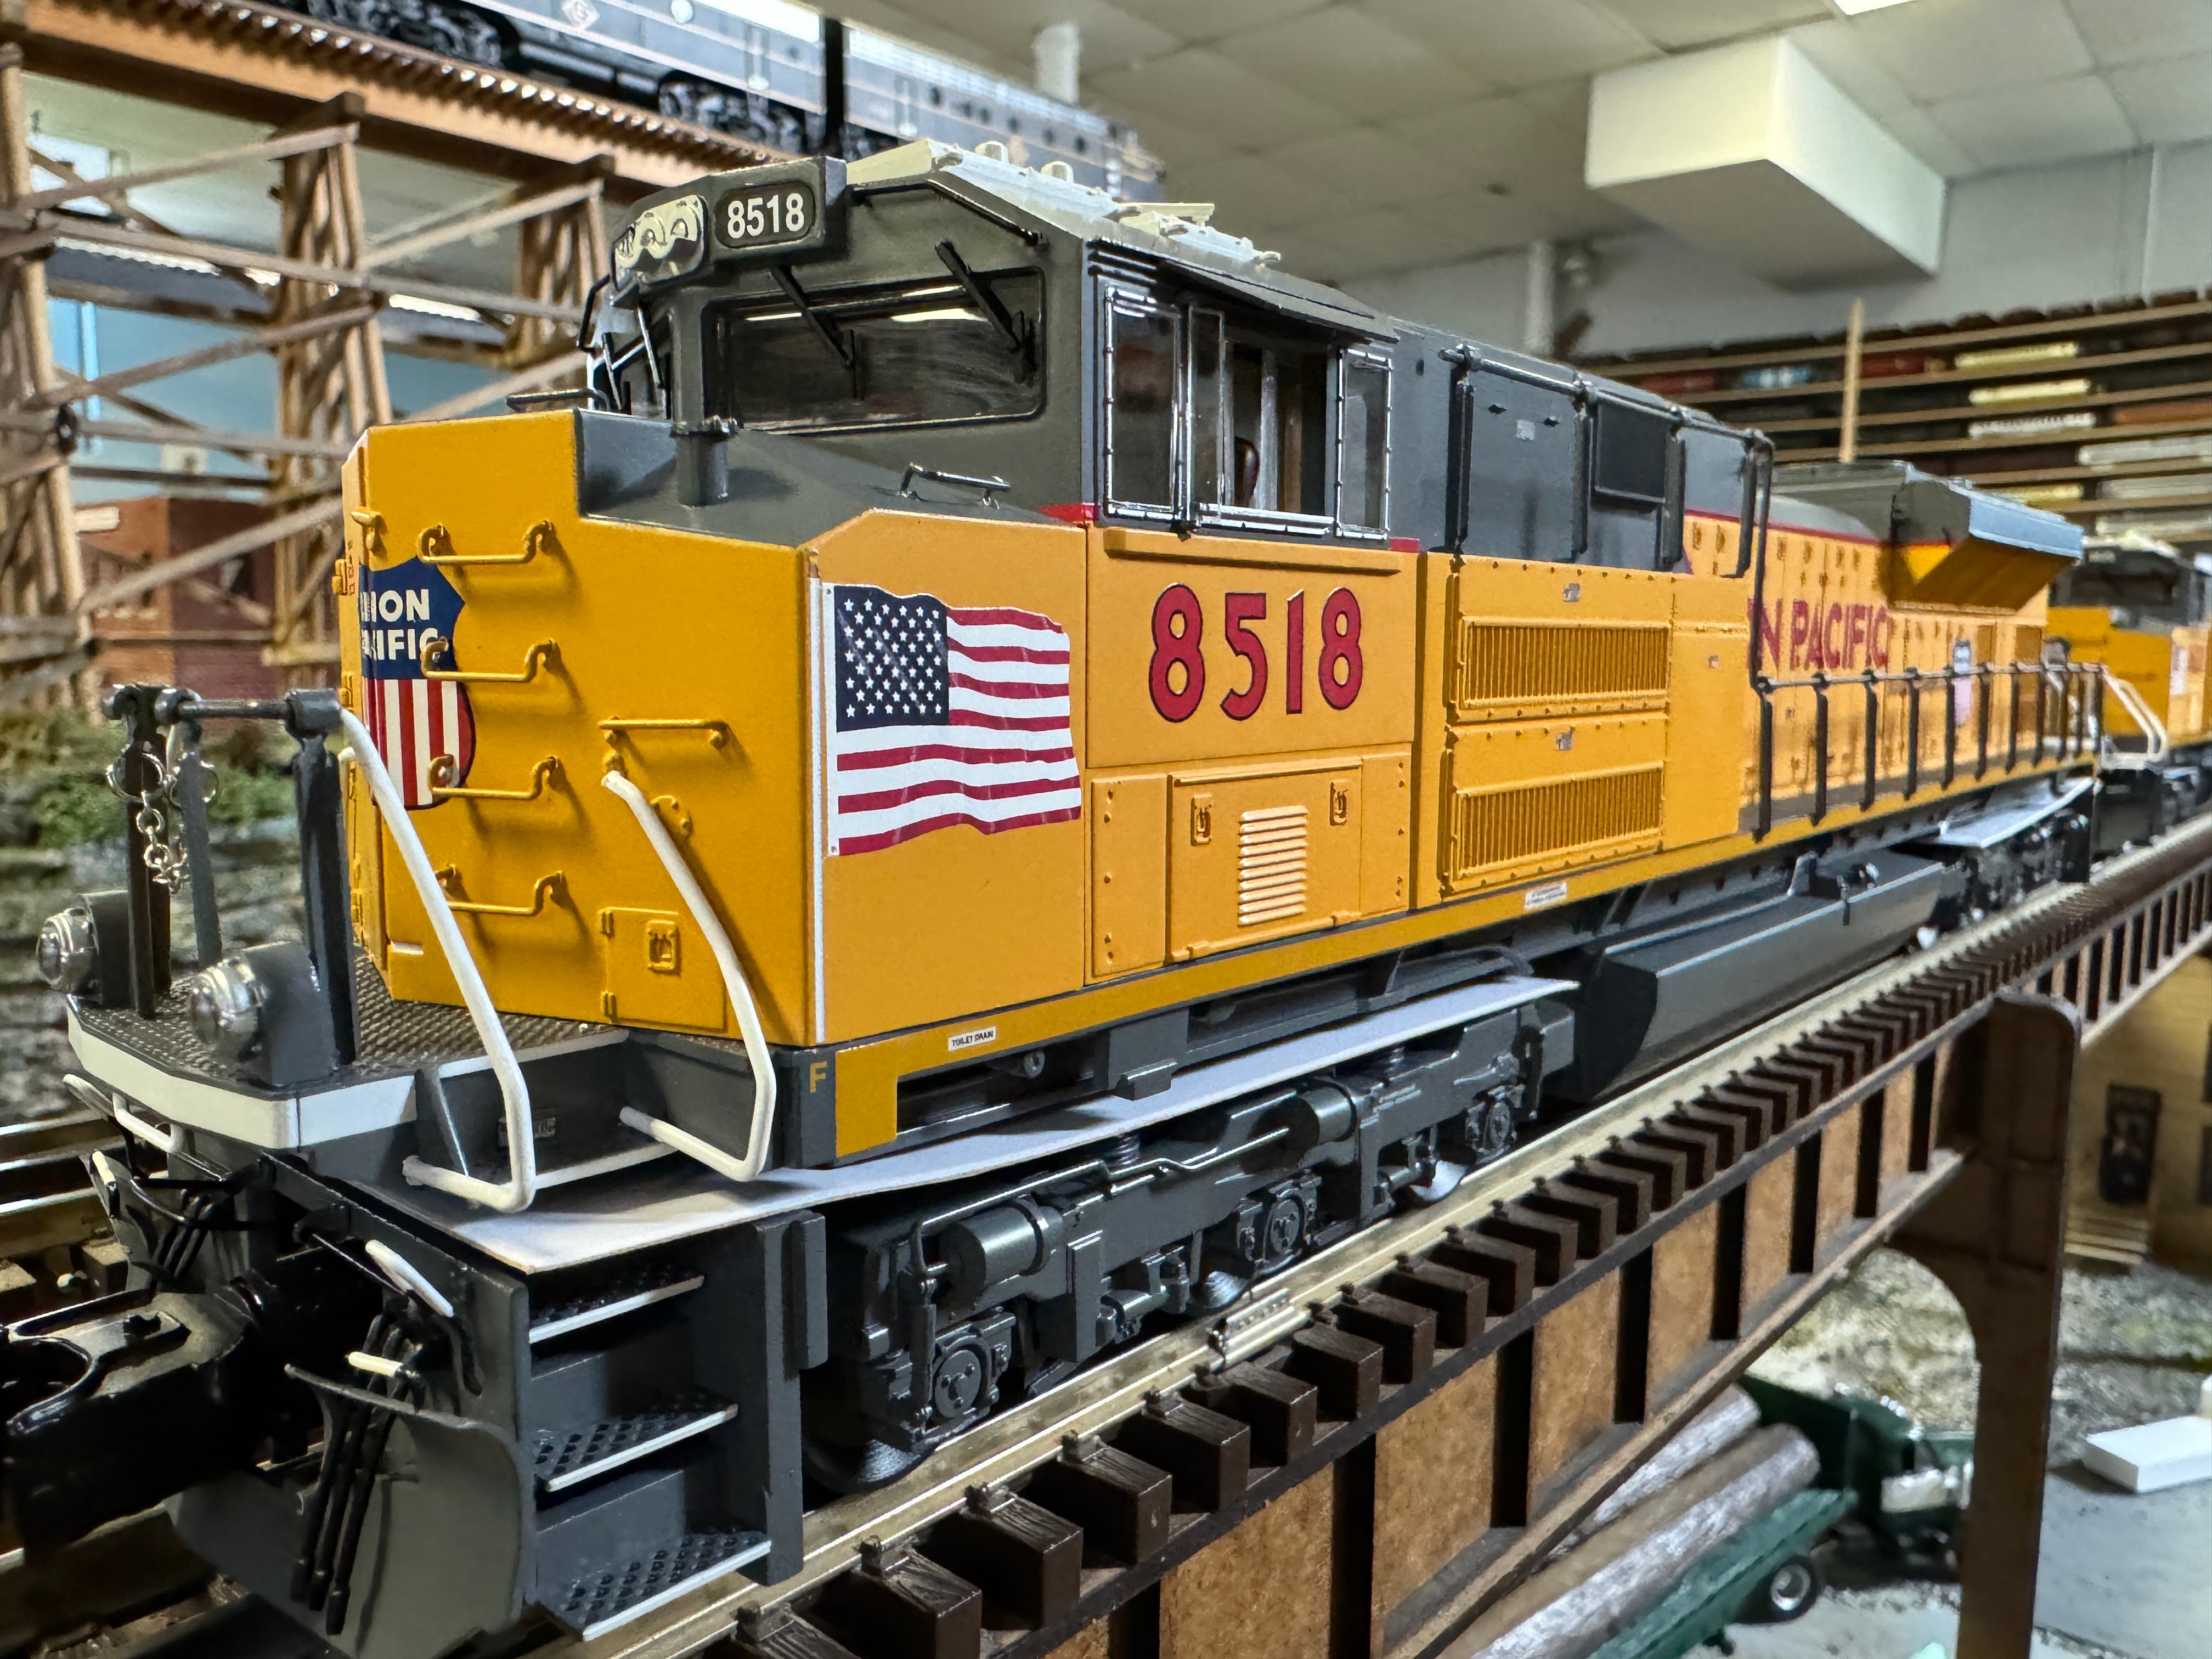 Lionel 2433031 - Legacy SD70ACE Diesel Engine "Union Pacific" #8518